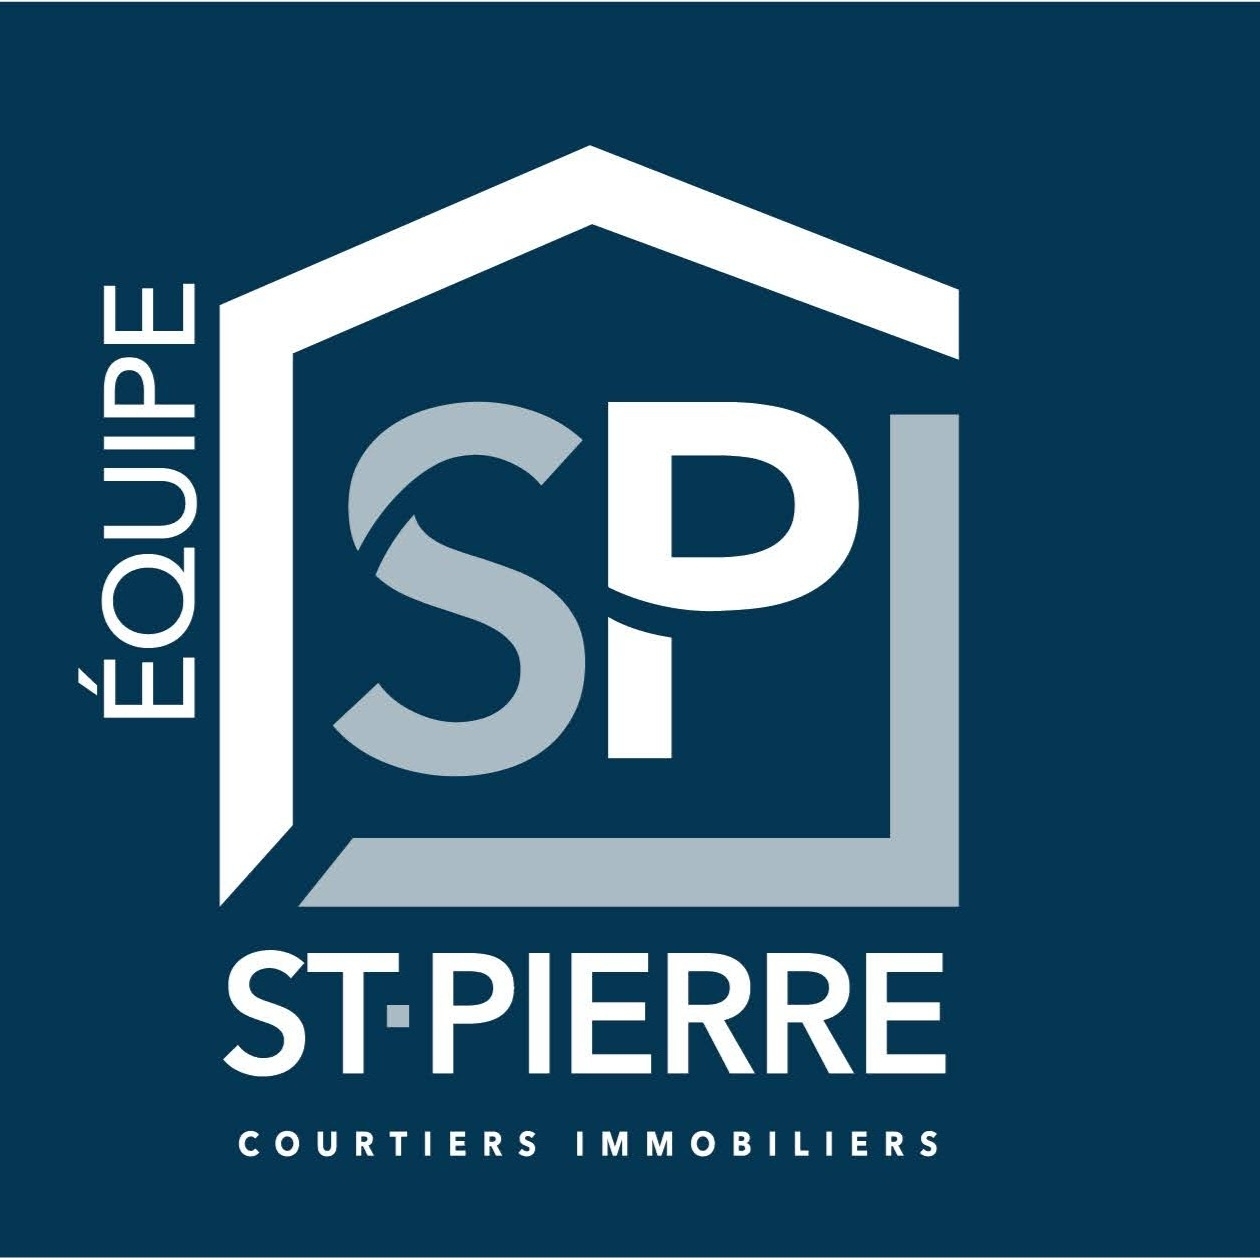 Équipe St-Pierre courtiers immobiliers Beloeil - Courtiers immobiliers et agences immobilières